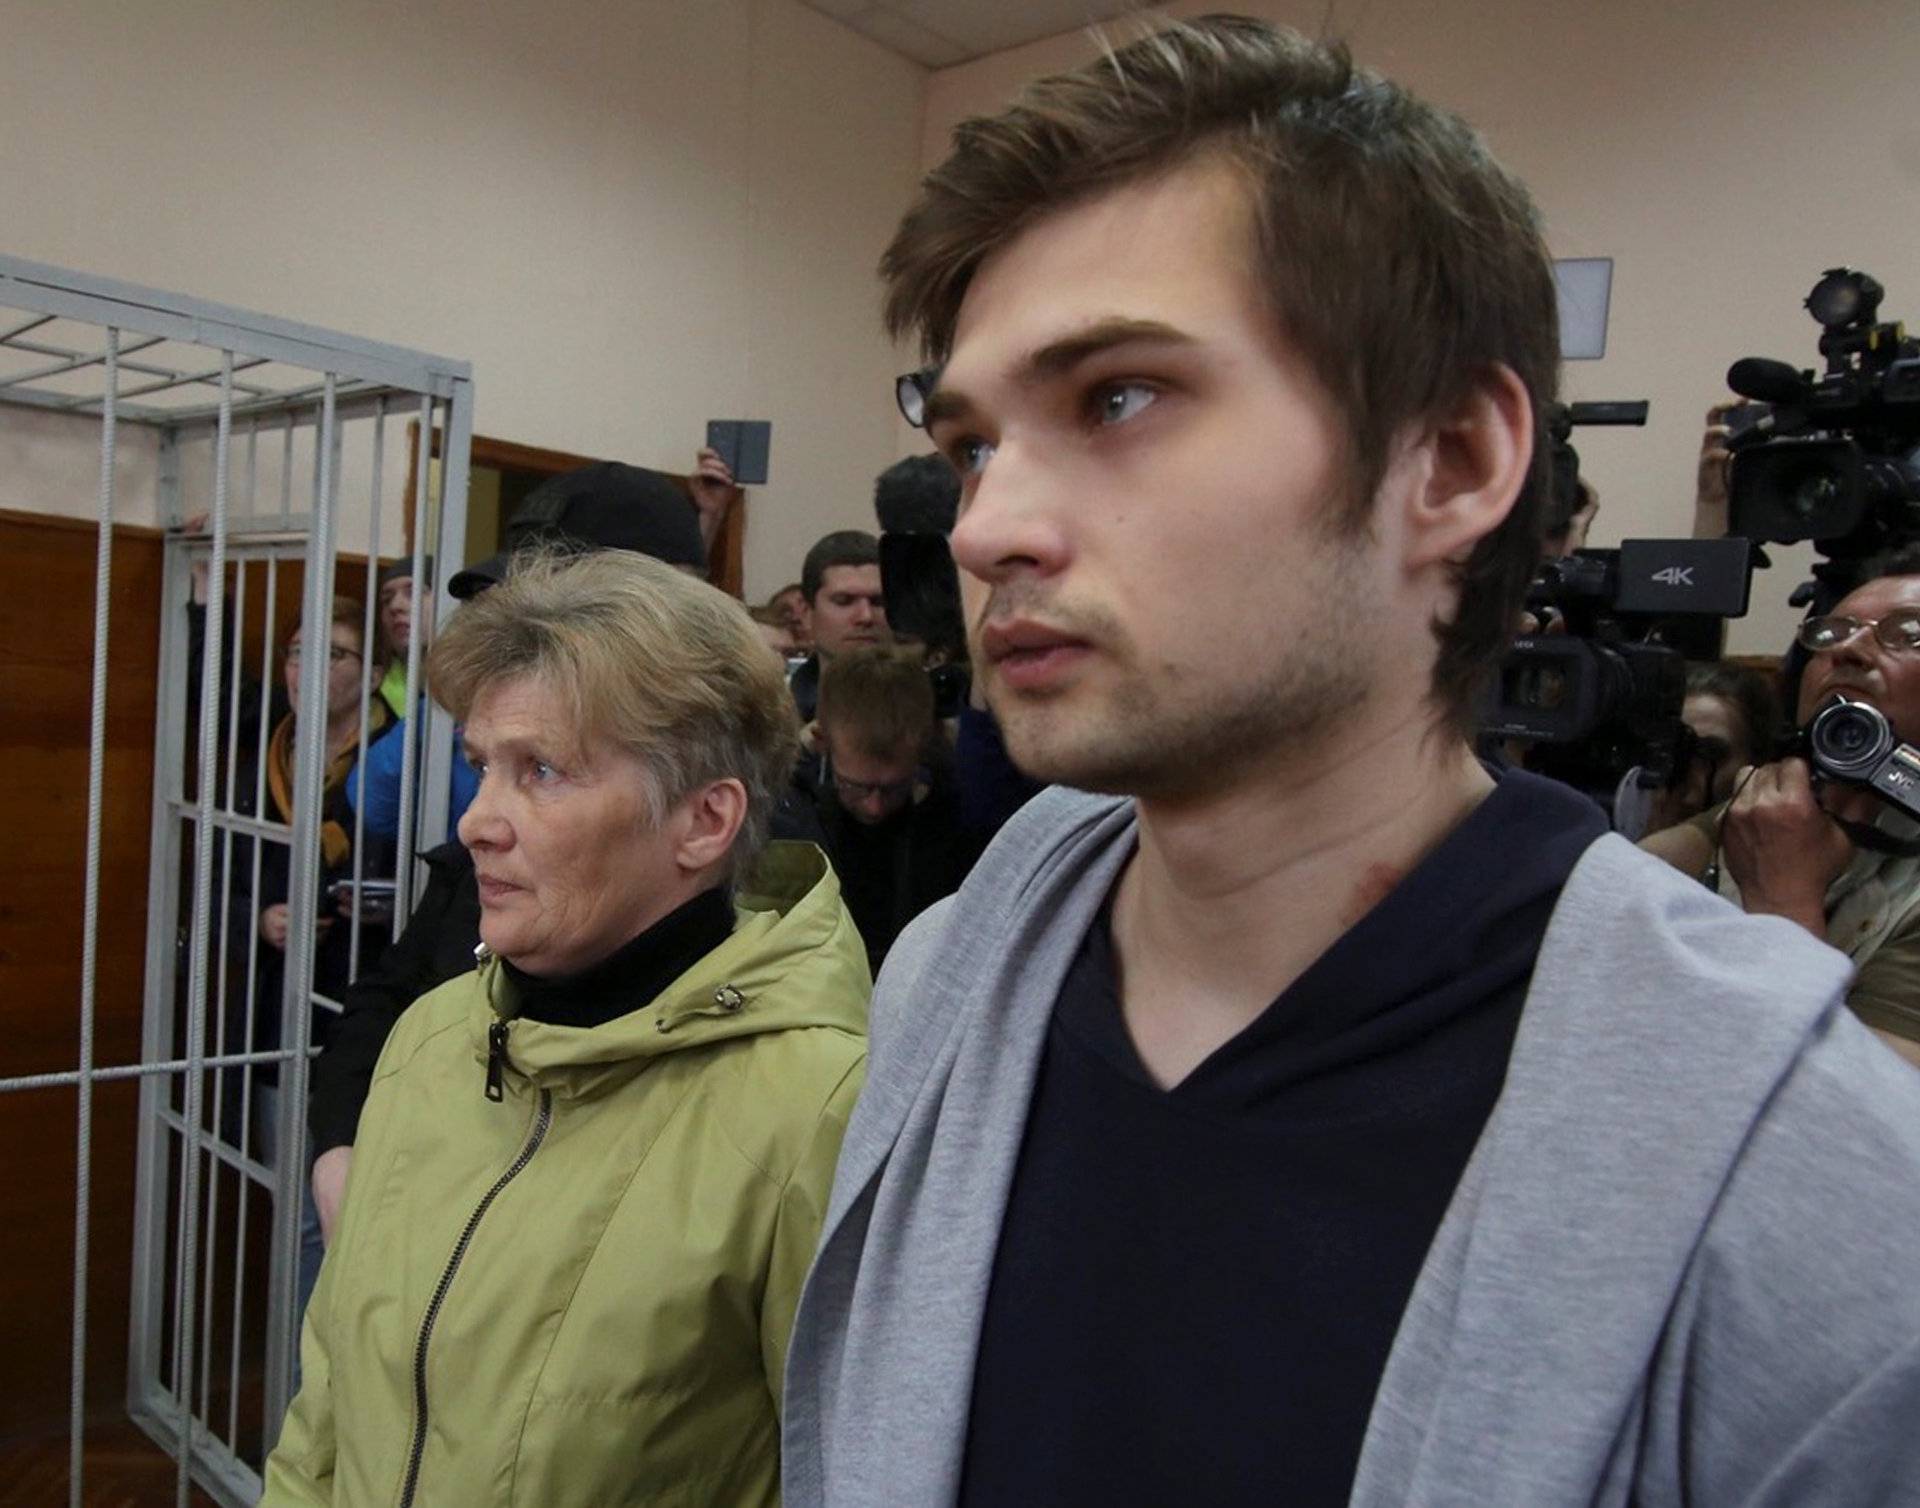 Ruslan Sokolovsky, a blogger who is accused by a state prosecutor for playing Pokemon Go inside an Orthodox church, appears with mother Yelena Chingina in a court during his sentencing in Yekaterinburg